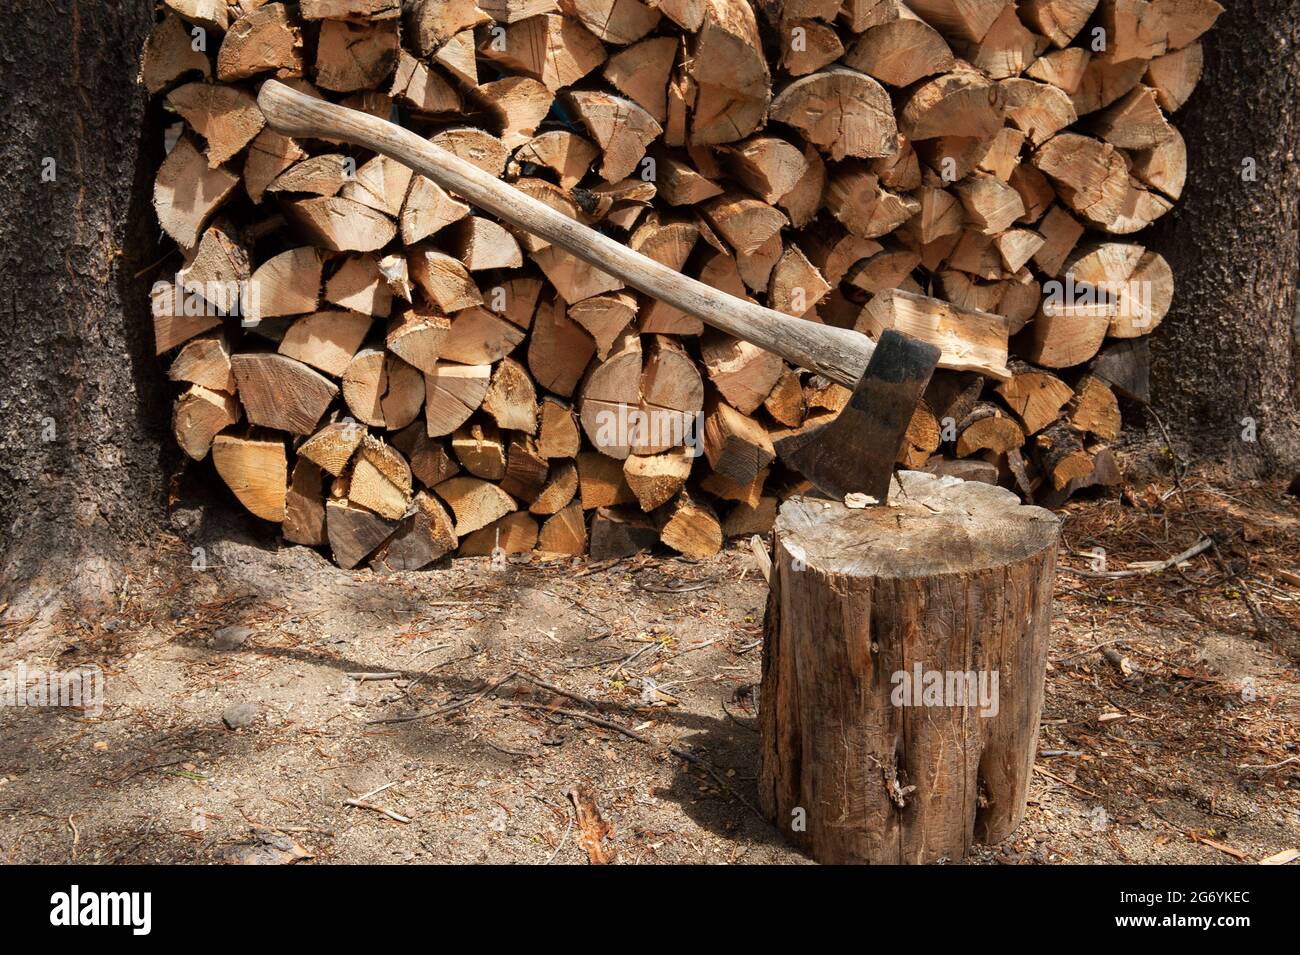 Axe, chopping block and firewood stacked between trees Stock Photo